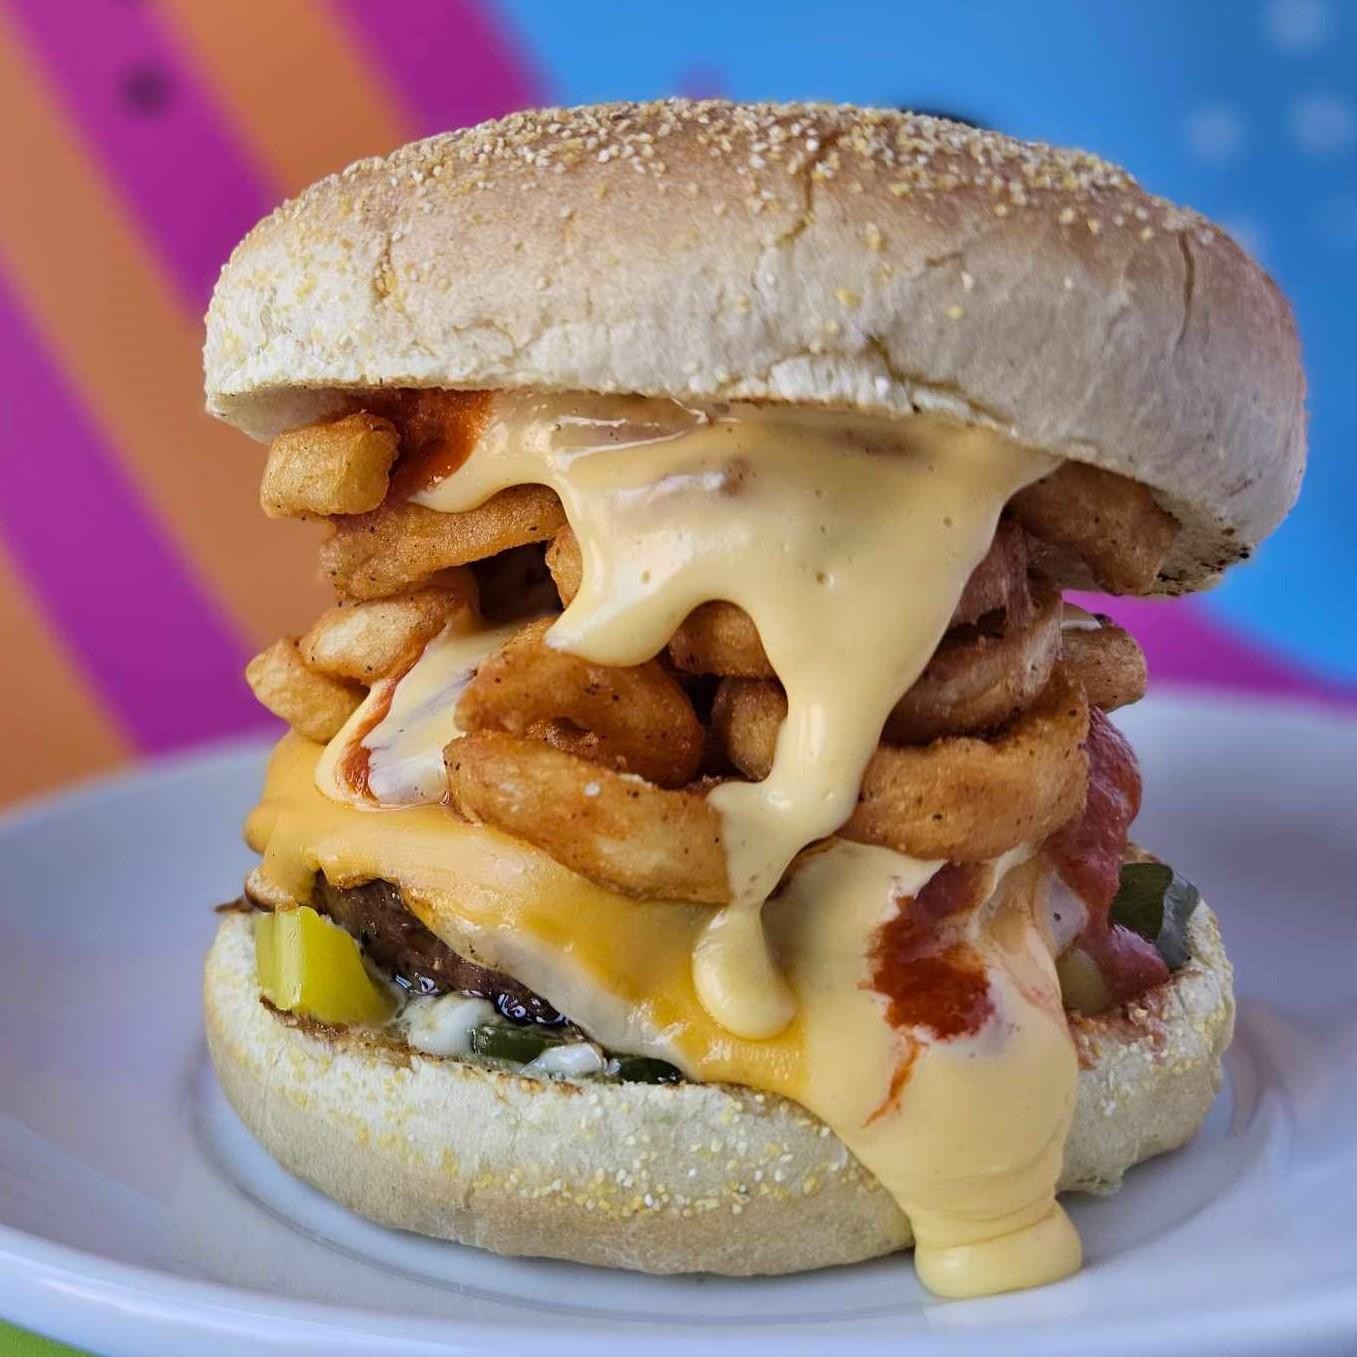 Bowser Burger - Kaiser Roll, Beef Patty, Banana Peppers, Jalapenos, American and Fontina Cheese, Pesto Aioli, Five Years of Fury, Curly Fries, Cheese Sauce